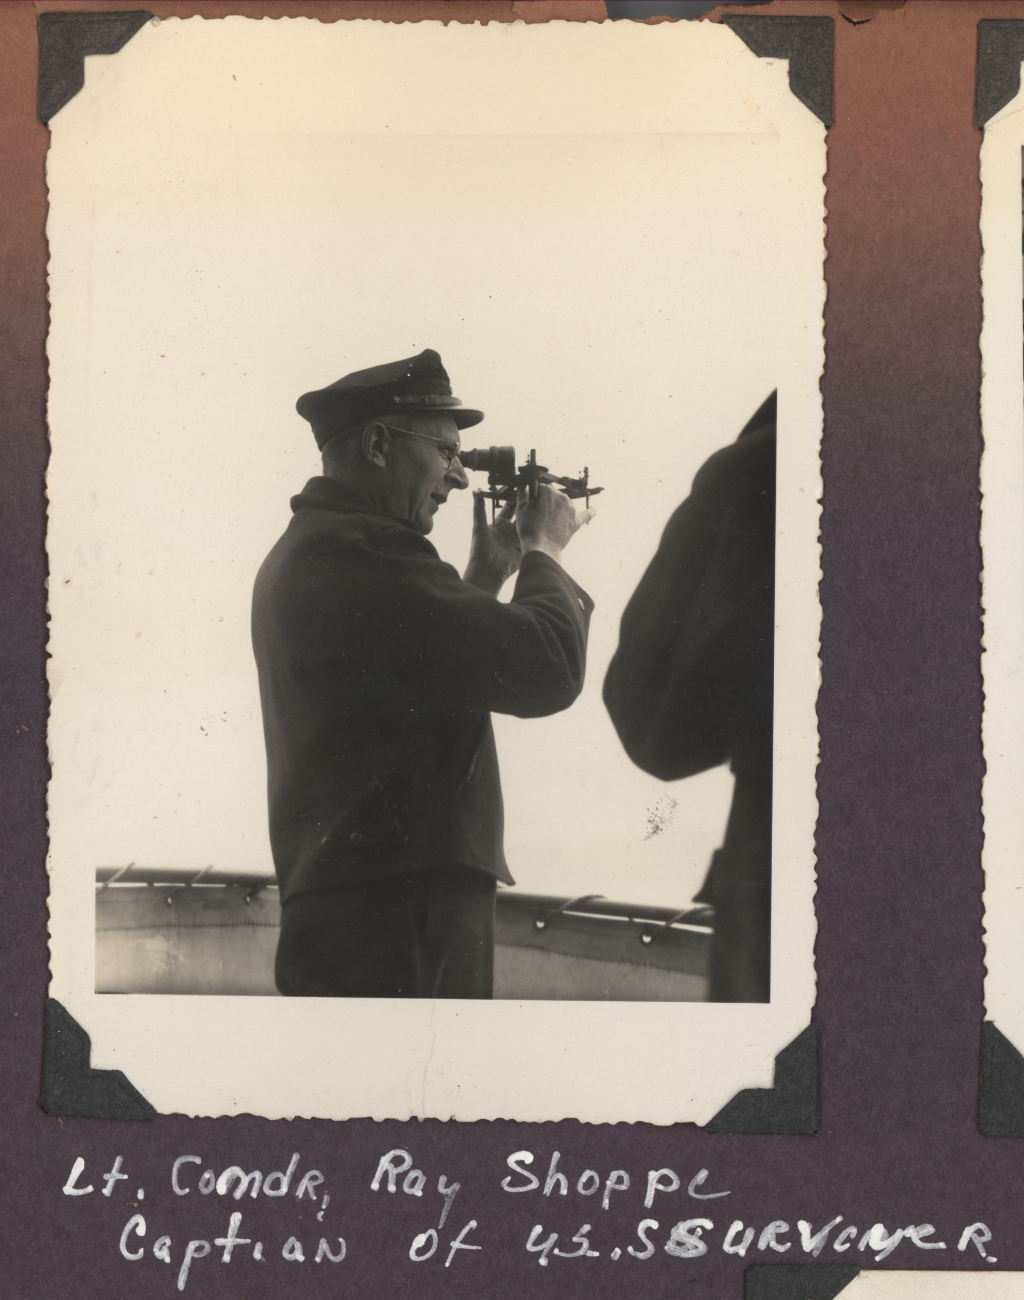 Lieutenant Commander Ray Schoppe, commanding officer of USC&GS; ShipSURVEYOR, measuring horizontal sextant angle during inshore ship hydrographicoperations